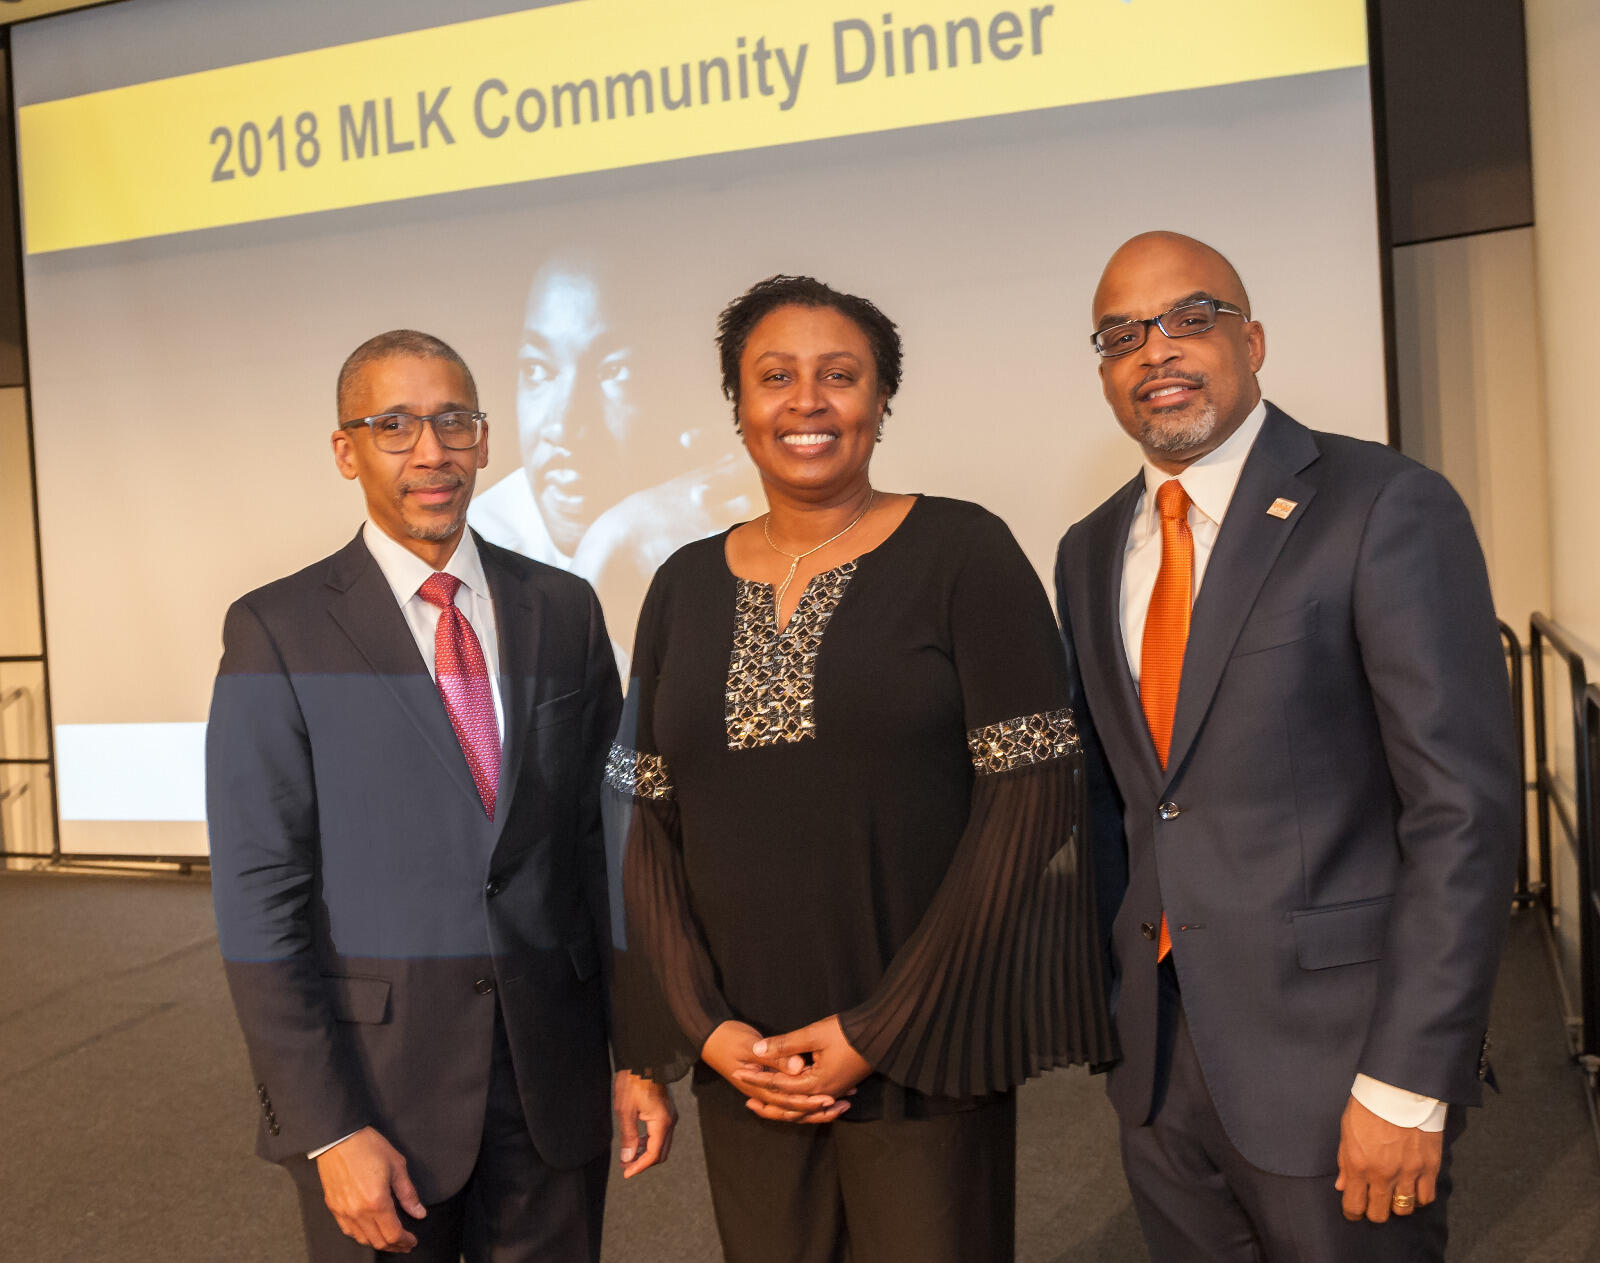 (from left to right) Kevin Allison, Ph.D., senior executive director of strategy and presidential administration and interim vice president for inclusive excellence, and Rosalyn Hobson Hargraves, Ph.D., co-chair, MLK Week Planning Committee and associate vice president for inclusive excellence, stand with Community Dinner keynote speaker Makola M. Abdullah, Ph.D., president of Virginia State University. Photo by Tom Kojcsich, VCU University Marketing.